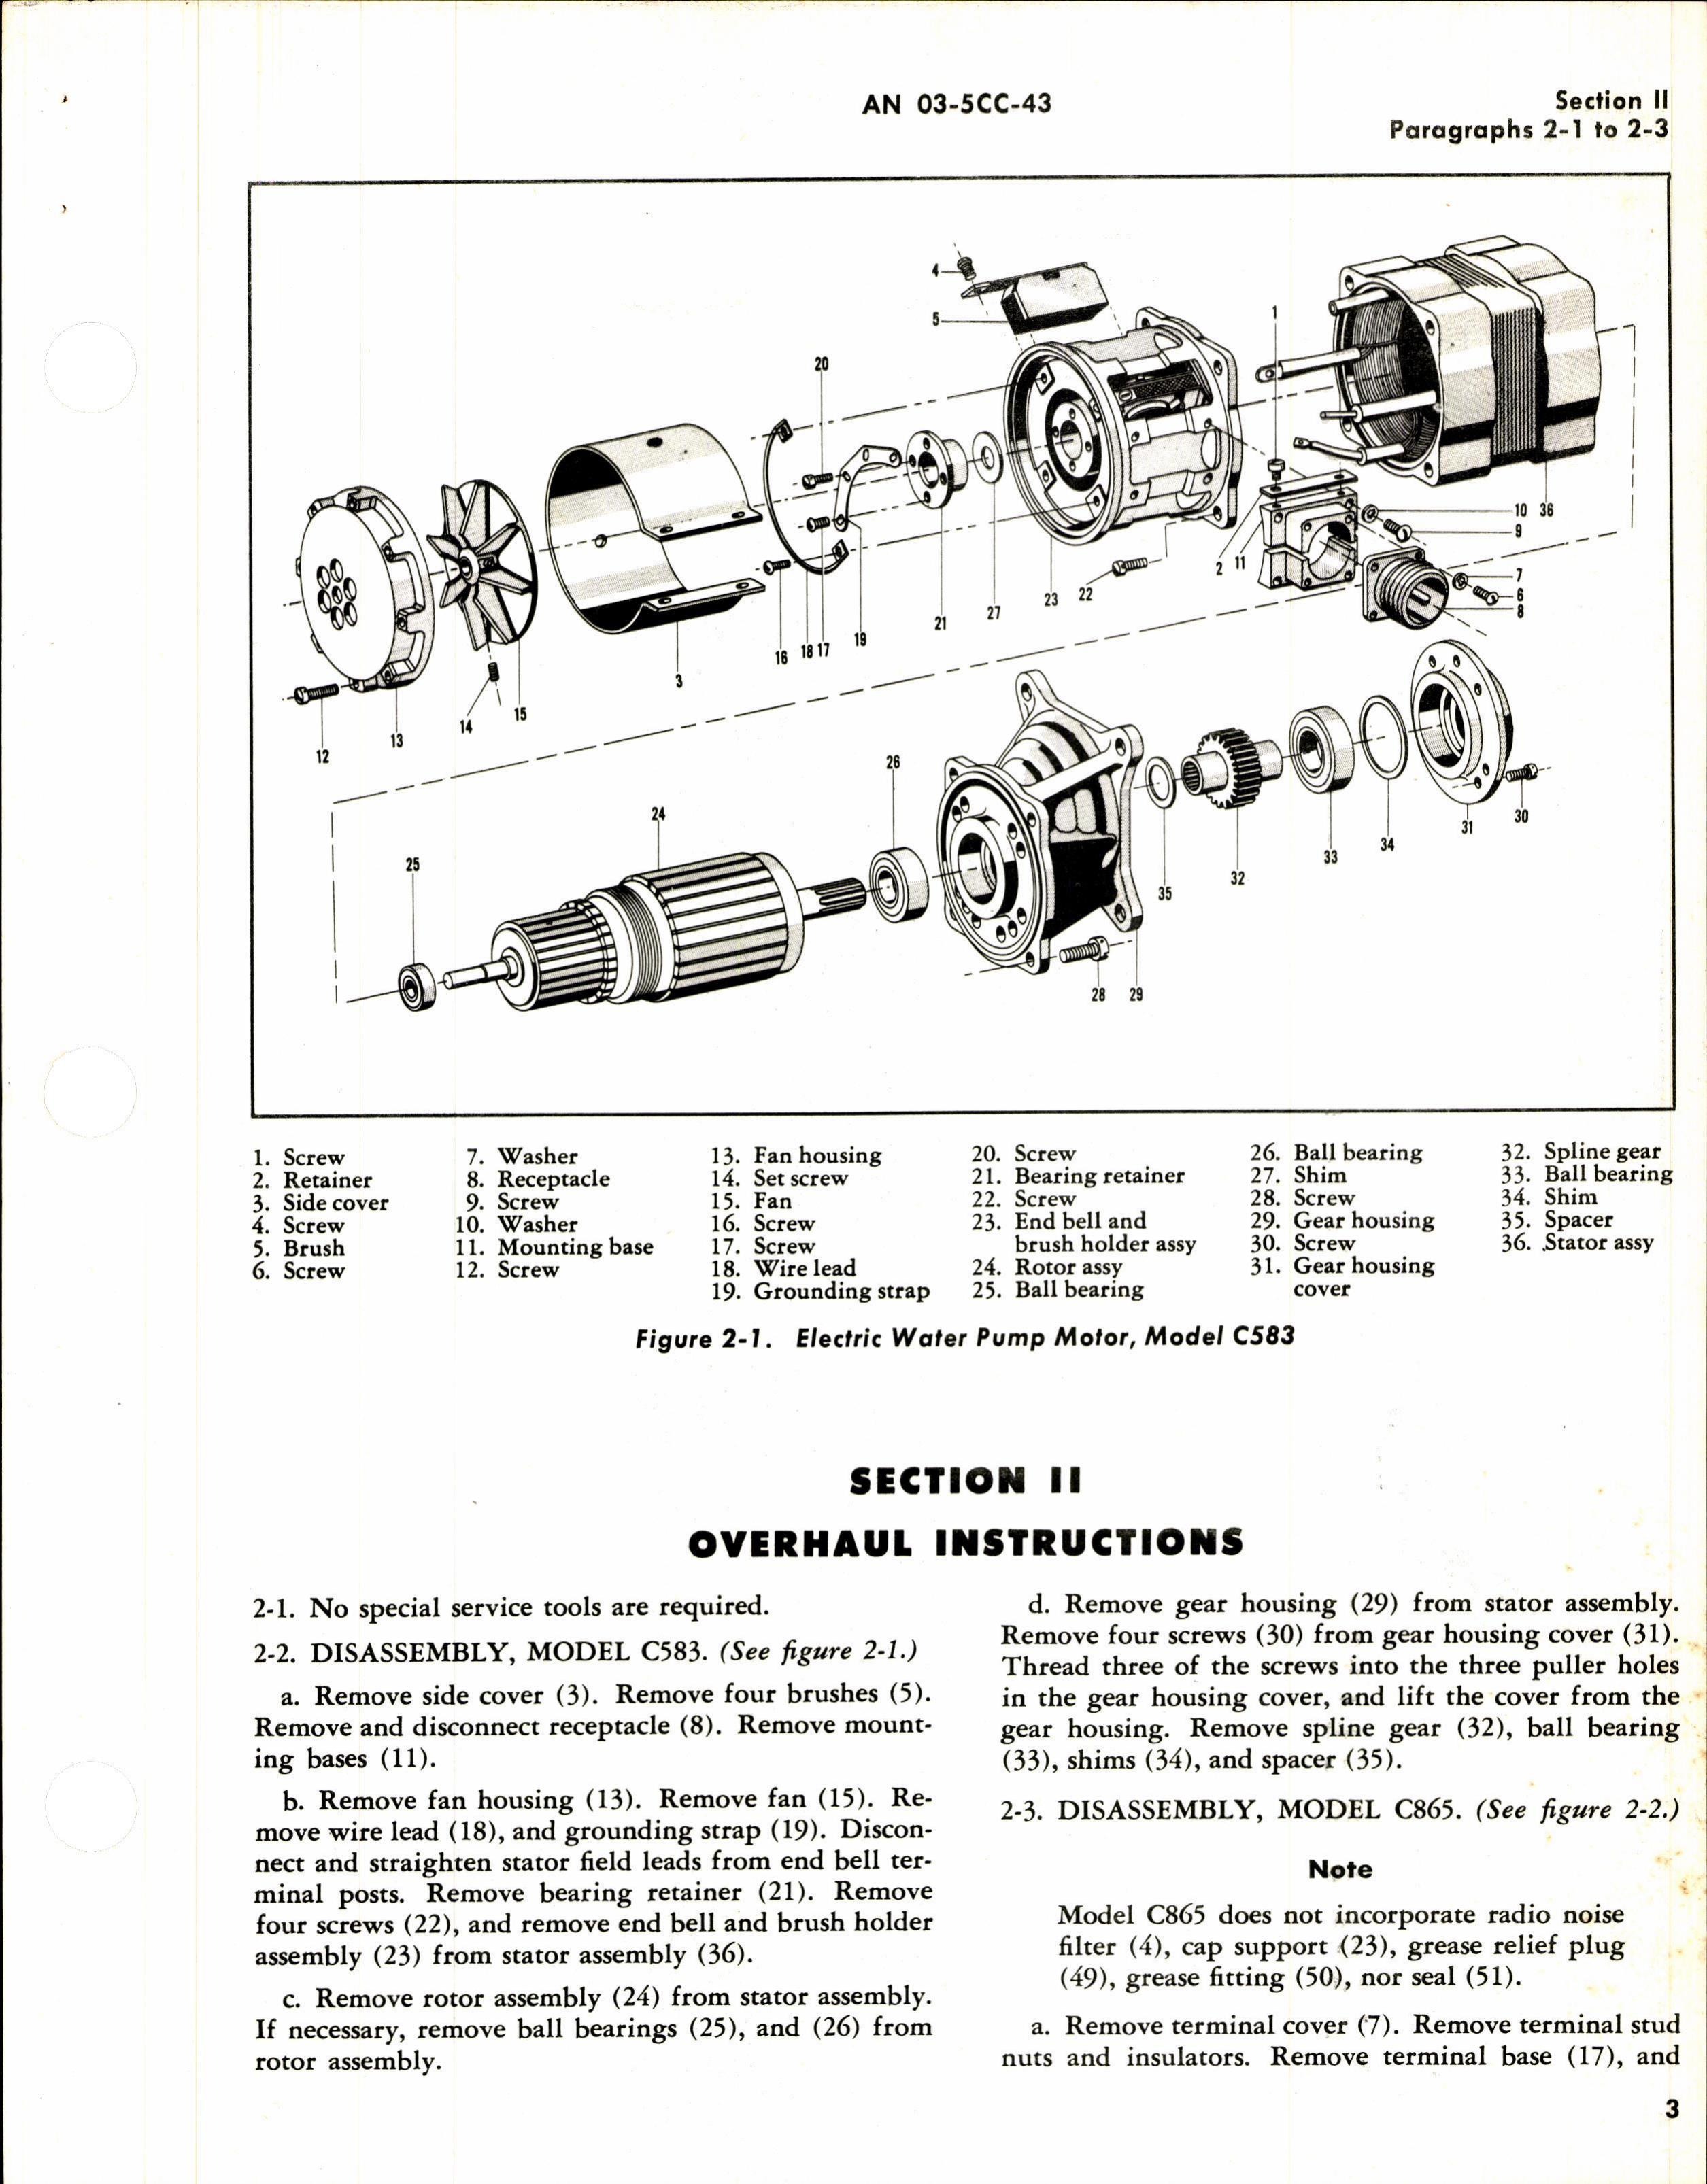 Sample page 7 from AirCorps Library document: Overhaul Instructions for Electrical Engineering & Mfg. Co. Electric Motors